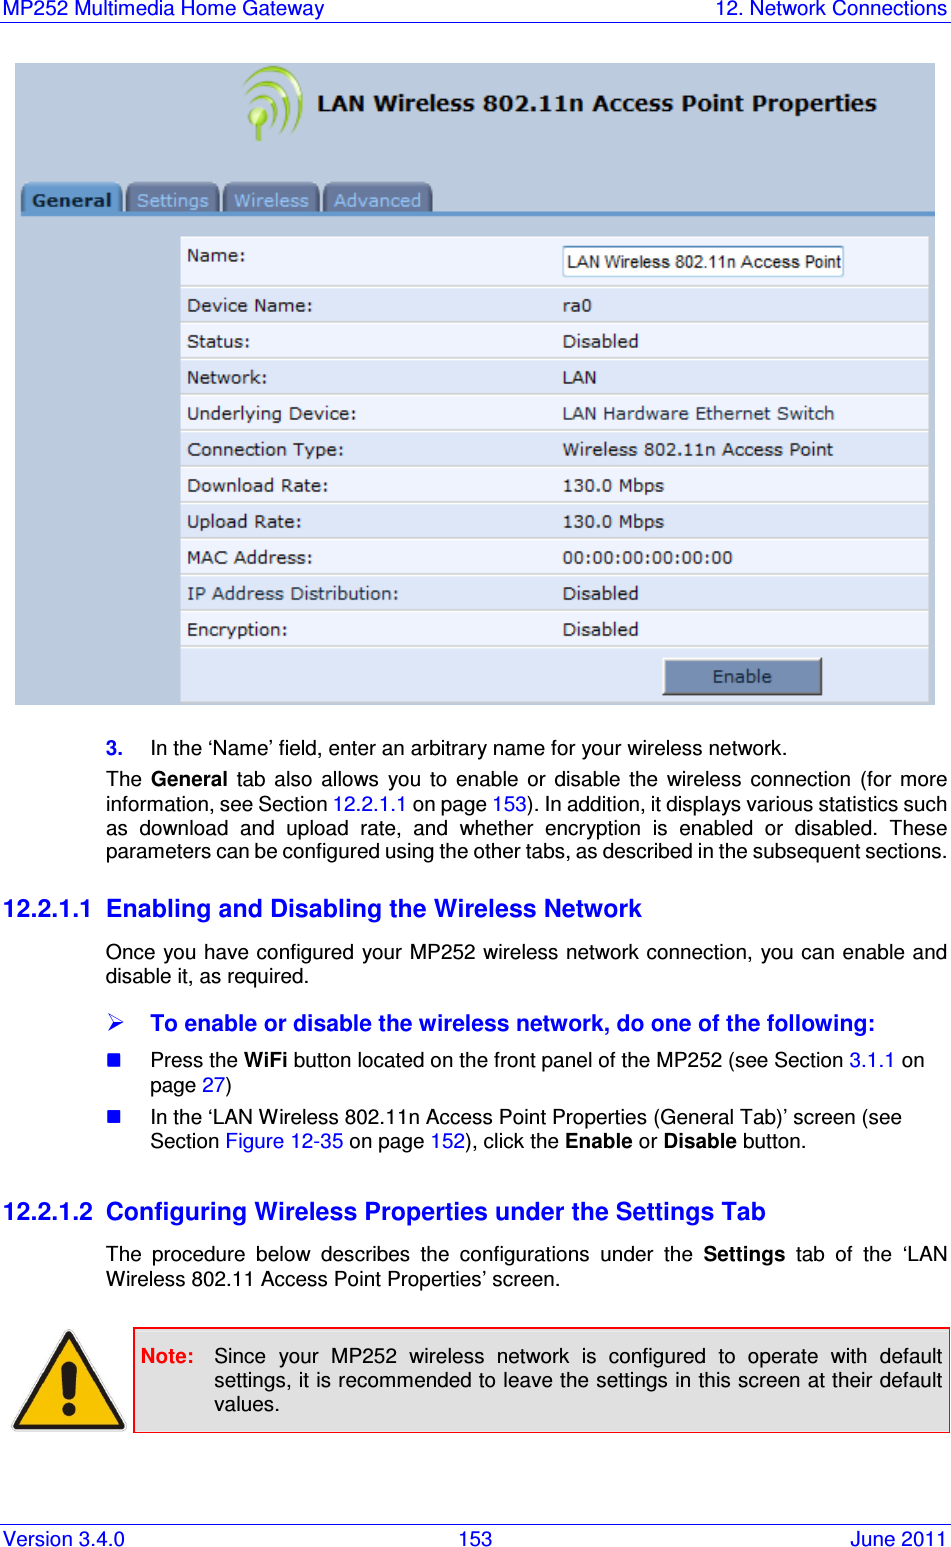 MP252 Multimedia Home Gateway  12. Network Connections Version 3.4.0  153  June 2011  3.  In the ‘Name’ field, enter an arbitrary name for your wireless network. The  General  tab  also  allows  you  to  enable  or  disable  the  wireless  connection  (for  more information, see Section 12.2.1.1 on page 153). In addition, it displays various statistics such as  download  and  upload  rate,  and  whether  encryption  is  enabled  or  disabled.  These parameters can be configured using the other tabs, as described in the subsequent sections. 12.2.1.1  Enabling and Disabling the Wireless Network Once you have configured your MP252 wireless network connection,  you can enable and disable it, as required.   To enable or disable the wireless network, do one of the following:  Press the WiFi button located on the front panel of the MP252 (see Section 3.1.1 on page 27)   In the ‘LAN Wireless 802.11n Access Point Properties (General Tab)’ screen (see Section Figure 12-35 on page 152), click the Enable or Disable button.   12.2.1.2  Configuring Wireless Properties under the Settings Tab The  procedure  below  describes  the  configurations  under  the  Settings  tab  of  the  ‘LAN Wireless 802.11 Access Point Properties’ screen.    Note:  Since  your  MP252  wireless  network  is  configured  to  operate  with  default settings, it is recommended to leave the settings in this screen at their default values.  